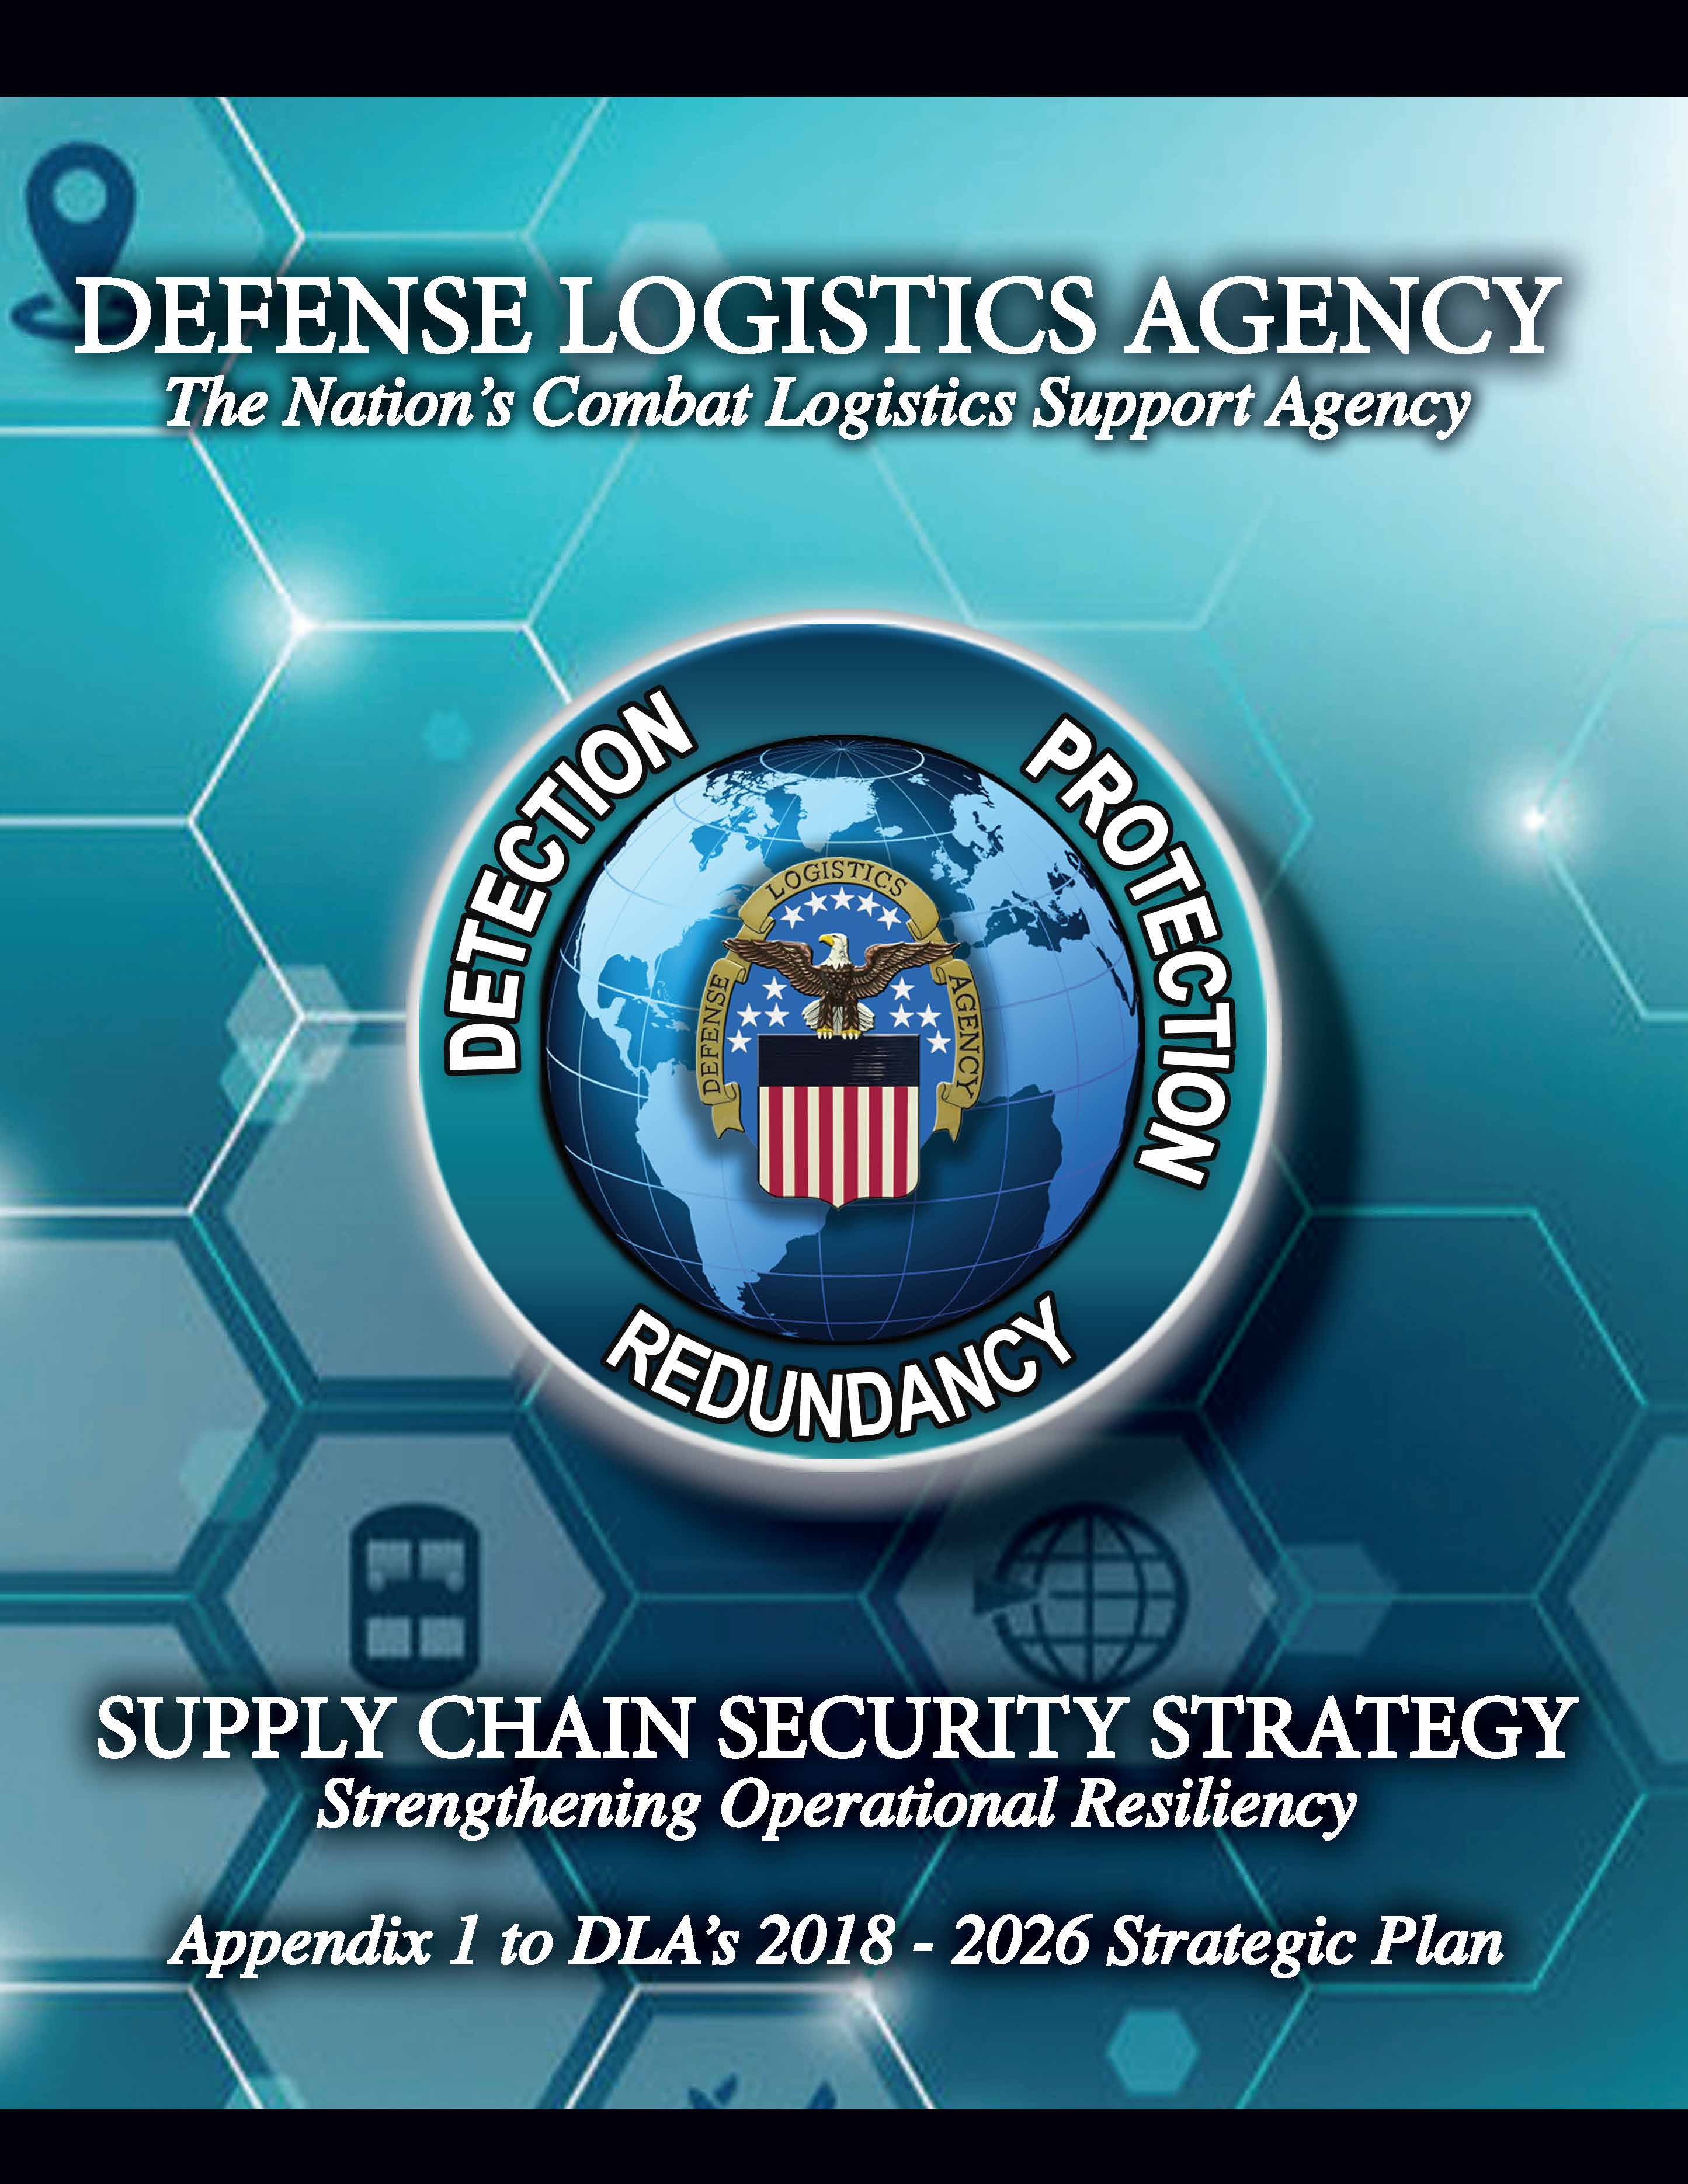 The cover image for the Supply Chain Security Plan book